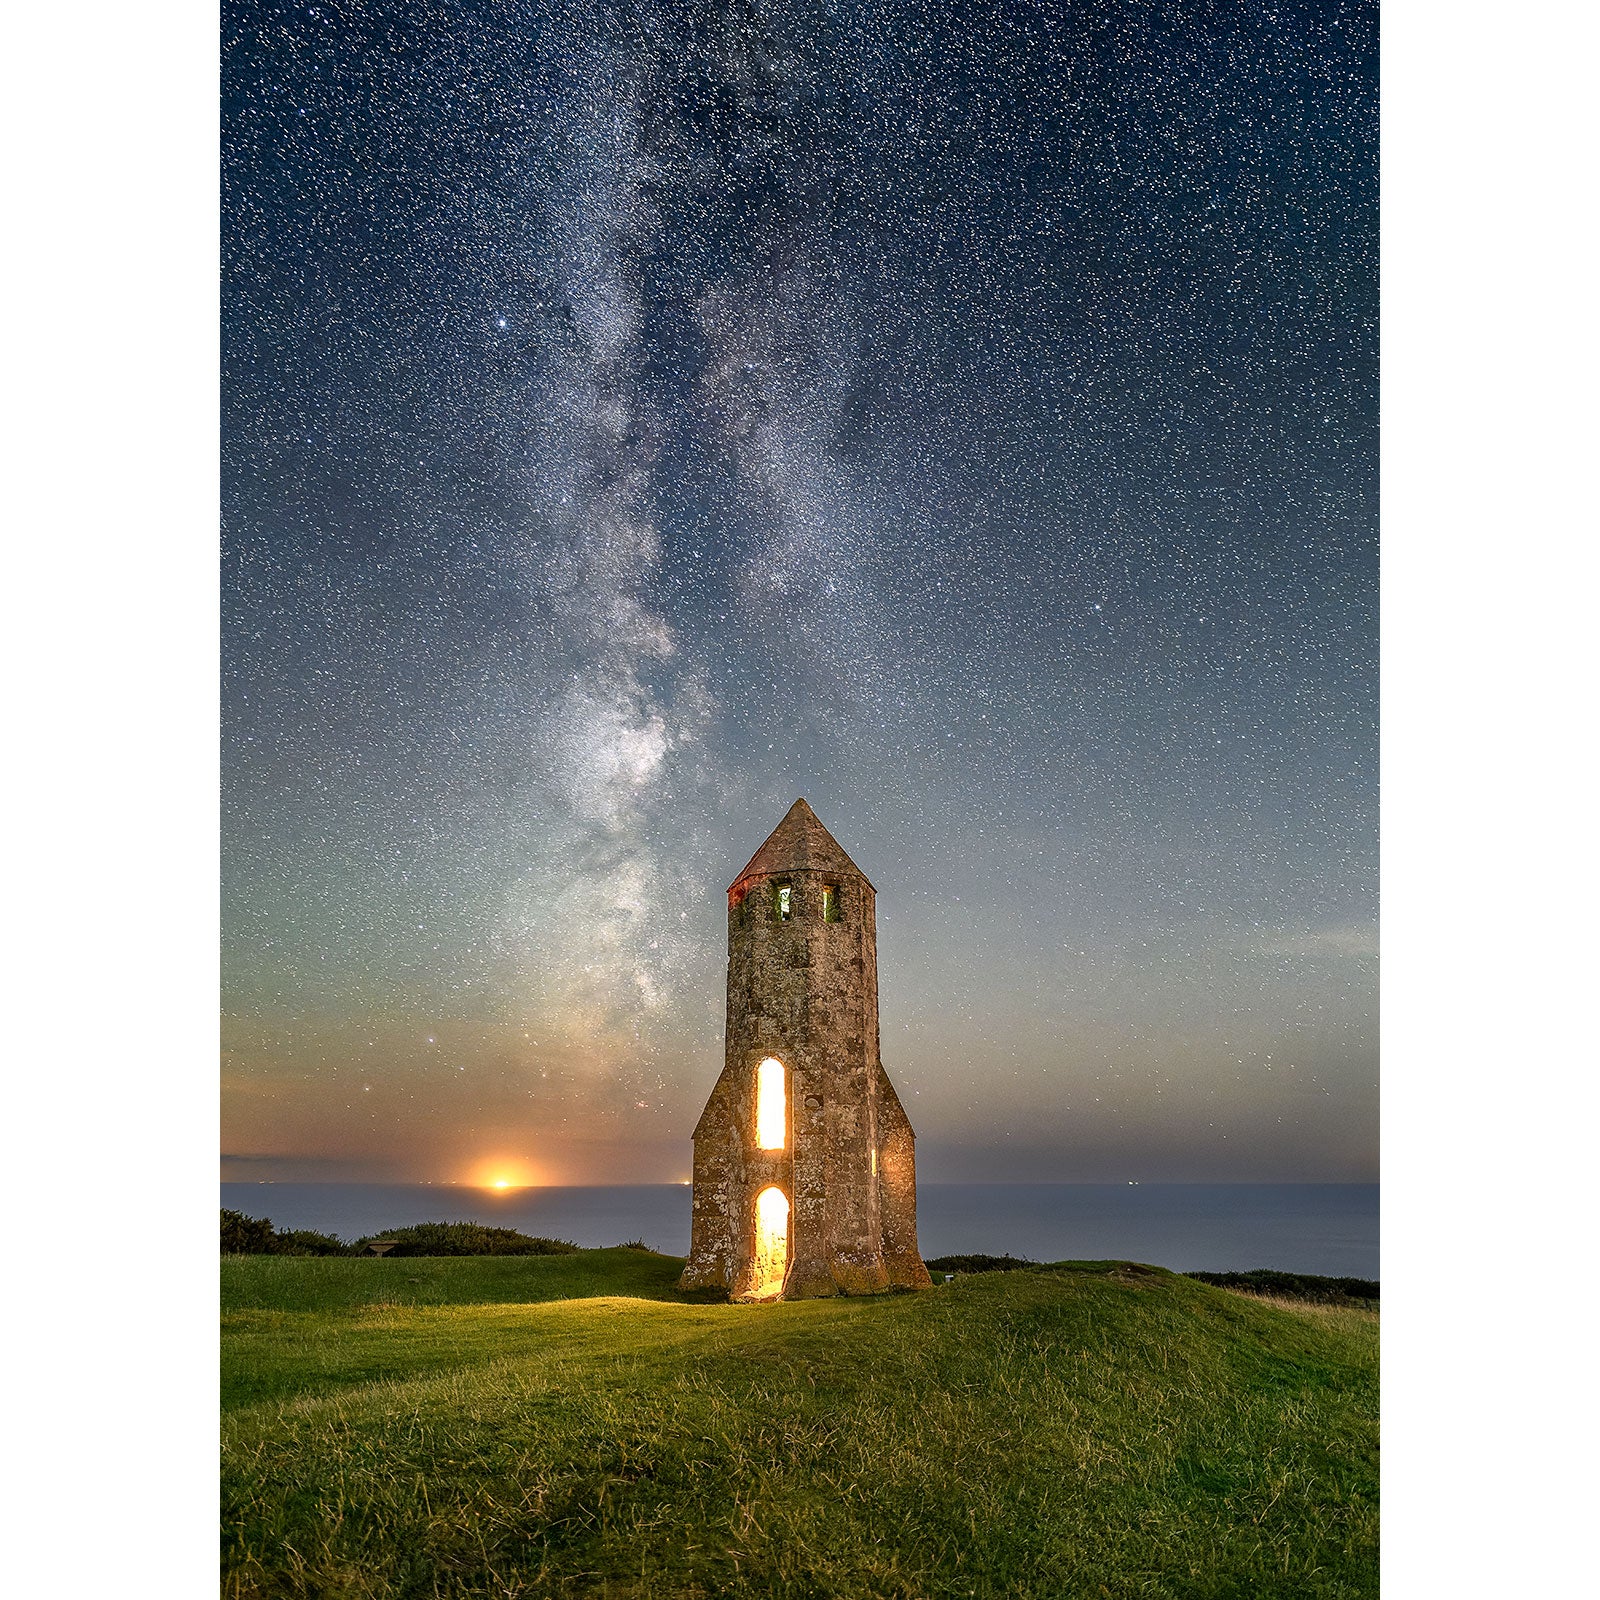 Milky Way, St. Catherine's Oratory - Available Light Photography